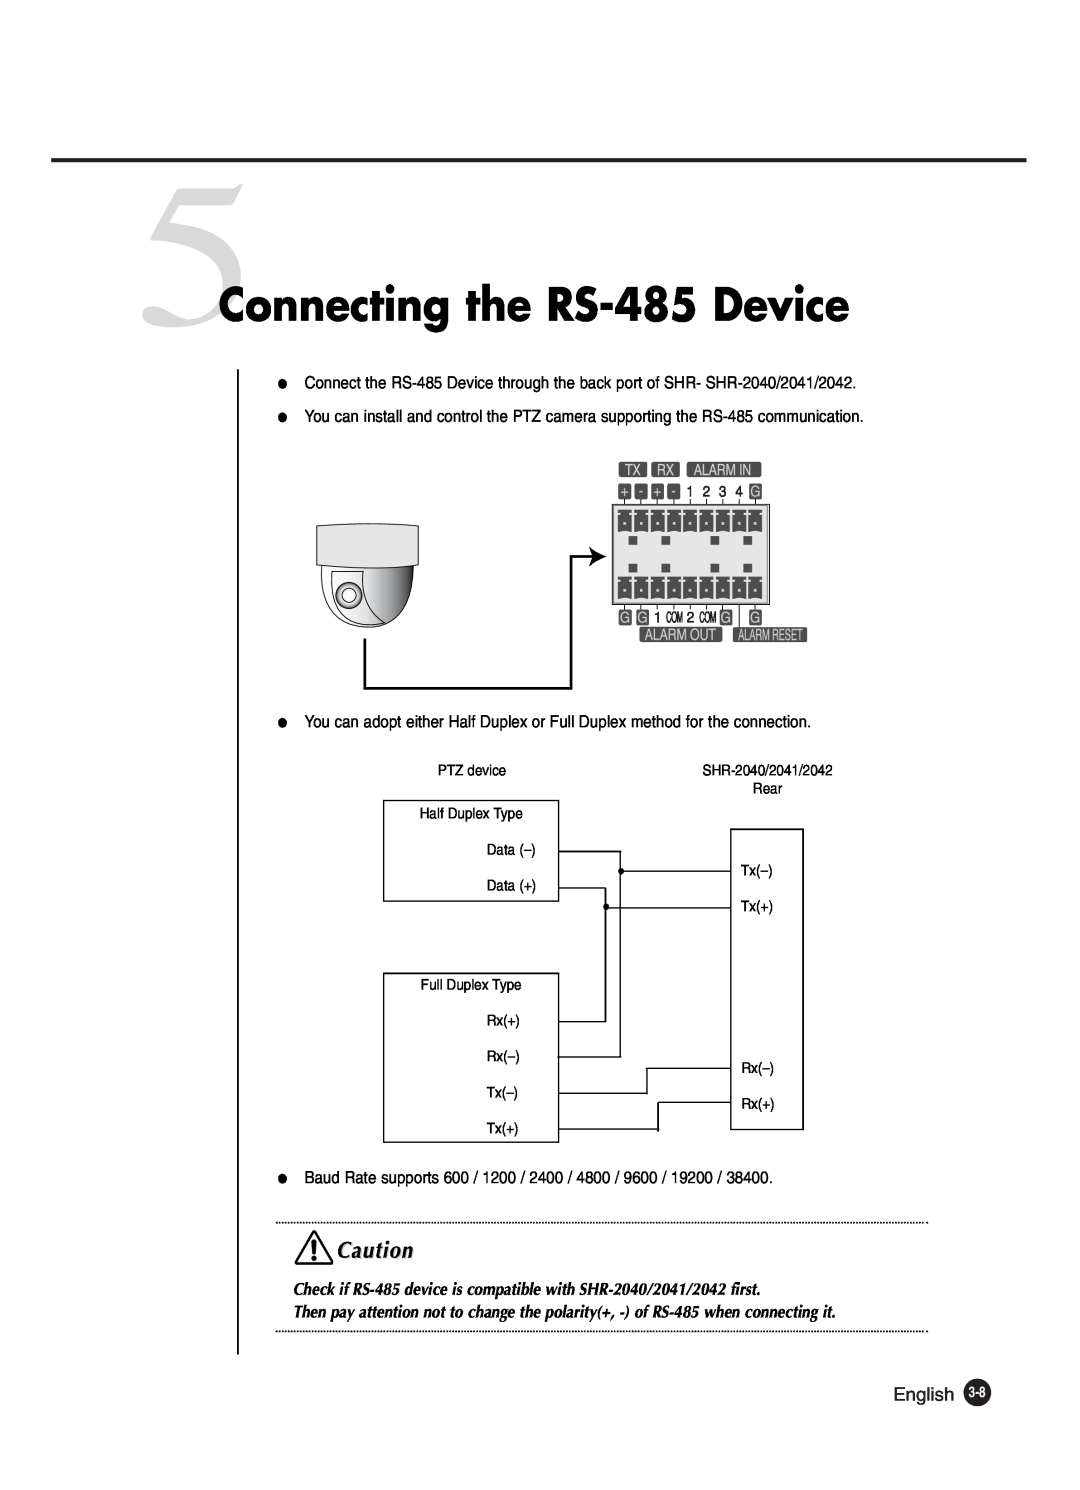 Samsung SHR-2040P250, SHR-2042P250 manual 5Connecting the RS-485 Device, English 